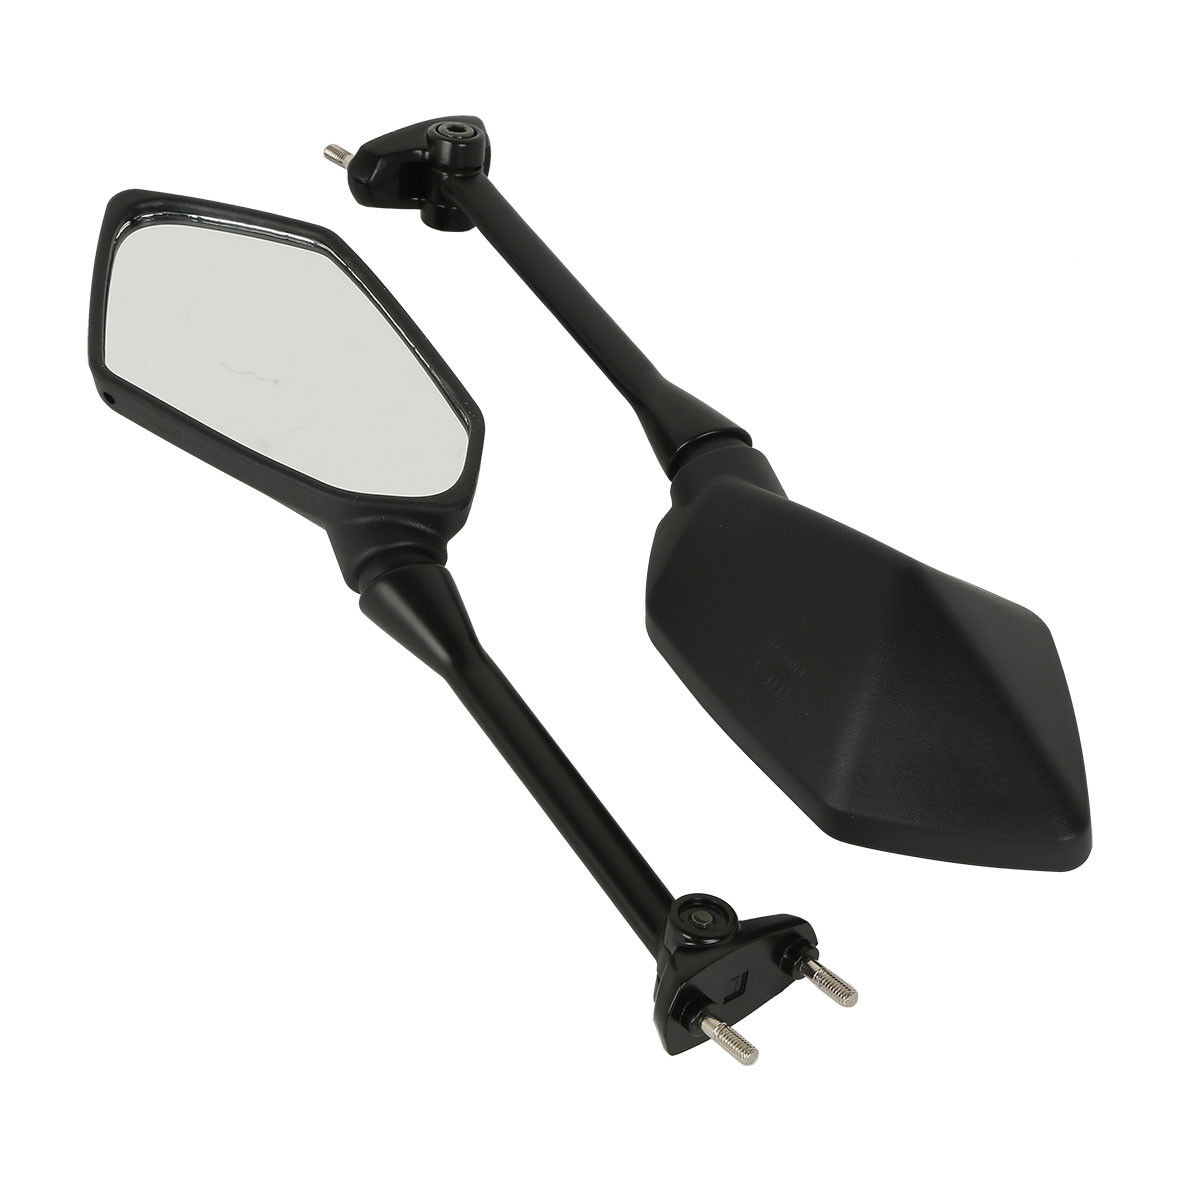 Side Outlet sale feature Rear View Mirrors Purchase Fit 2012 NINJA650R Kawasaki For 2009-2016